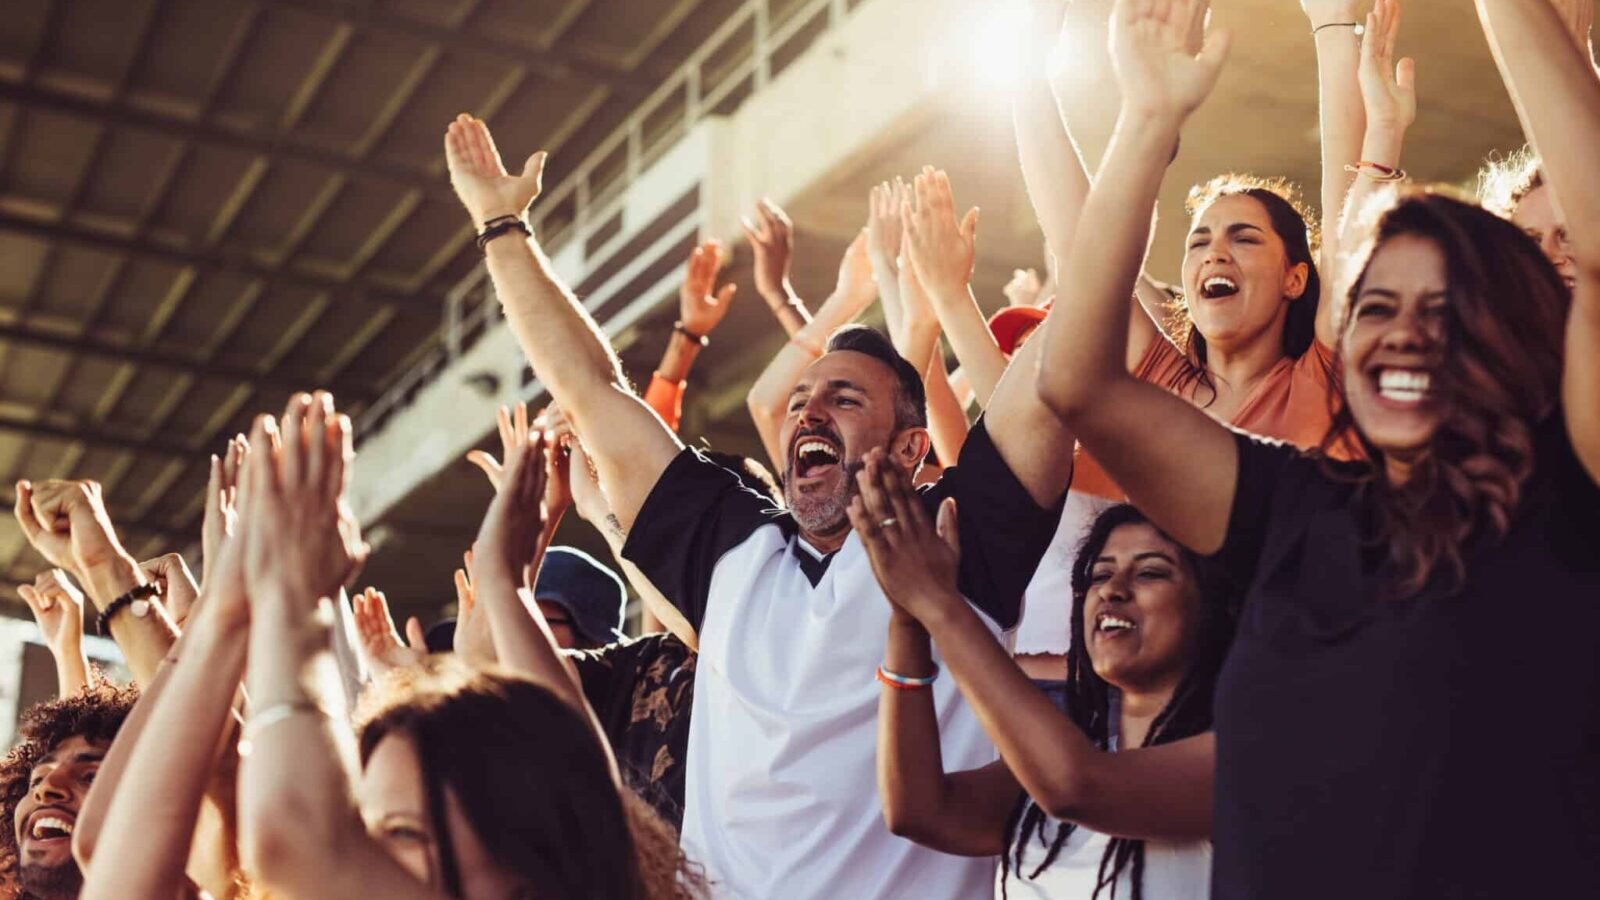 <p>Non-sports fans are often shocked to find that attending a professional baseball game is about so much more than baseball. You may not be able to tell a basketball from a football, but spending a few hours sitting in the sun sipping cold brews with your buddy is our definition of time well spent.</p>